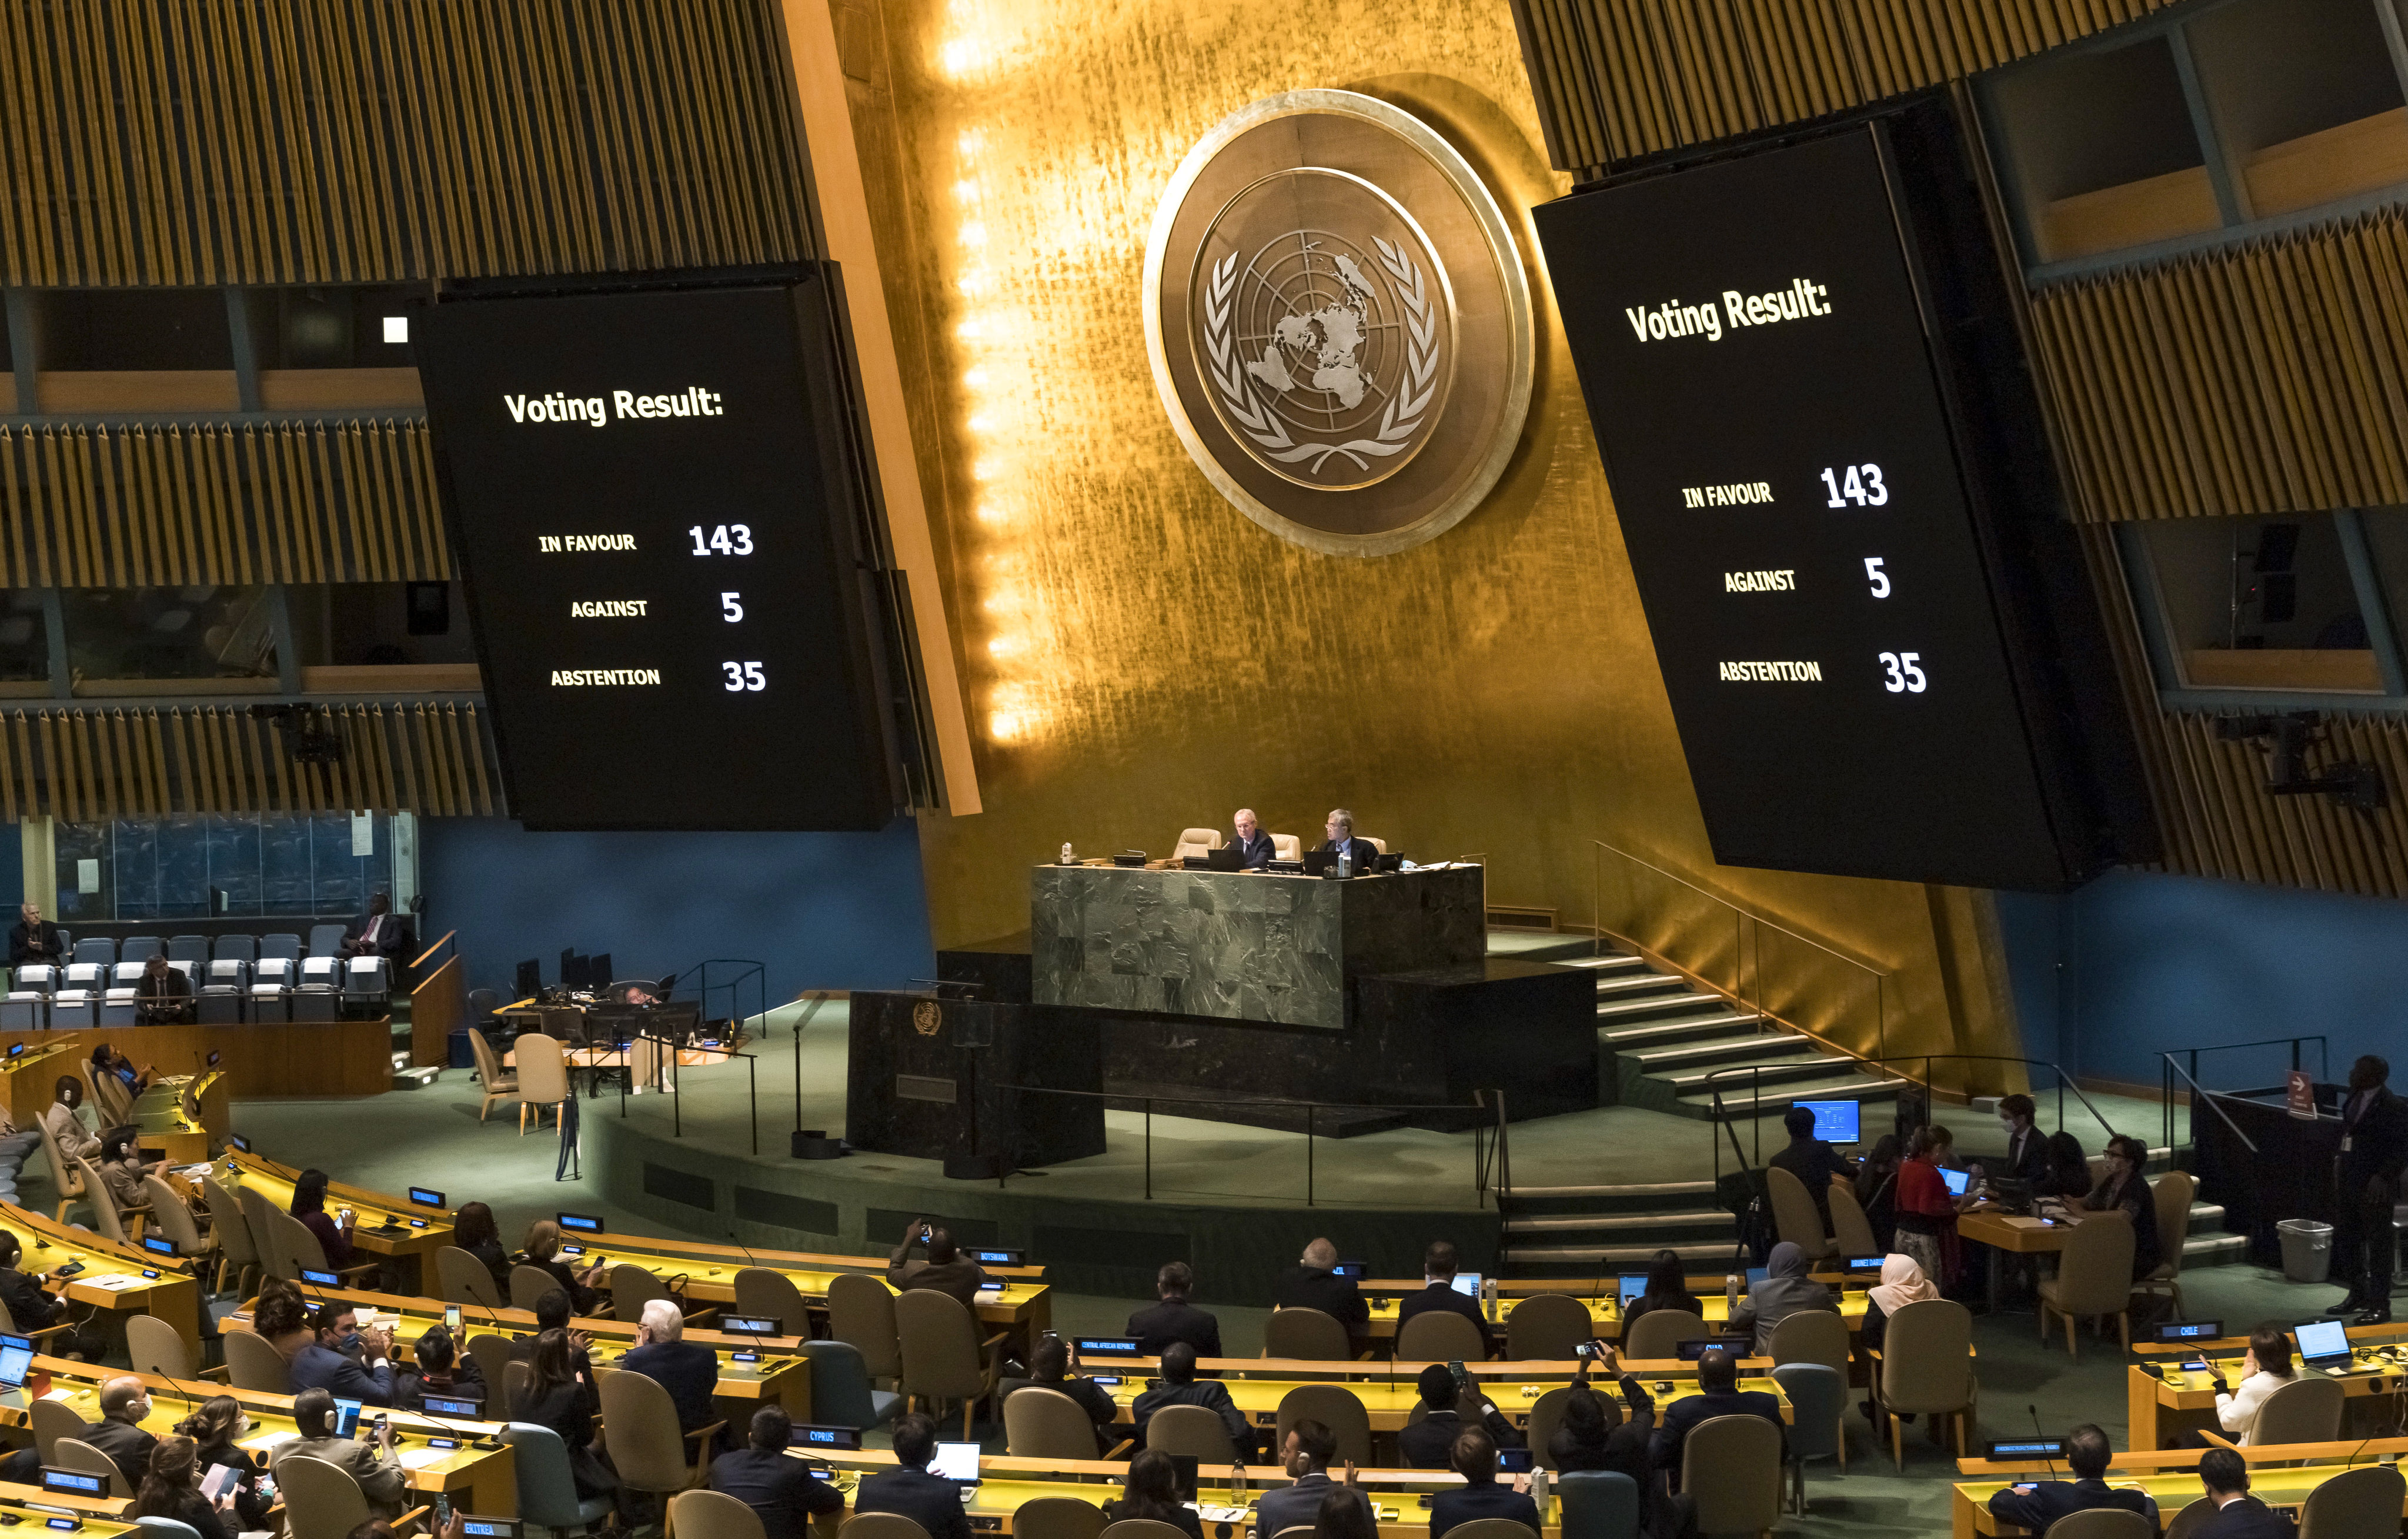 Screens show results of voting by the UN General Assembly on a resolution condemning Russia’s annexation of regions of Ukraine during an emergency session in New York on Wednesday. Photo: EPA-EFE